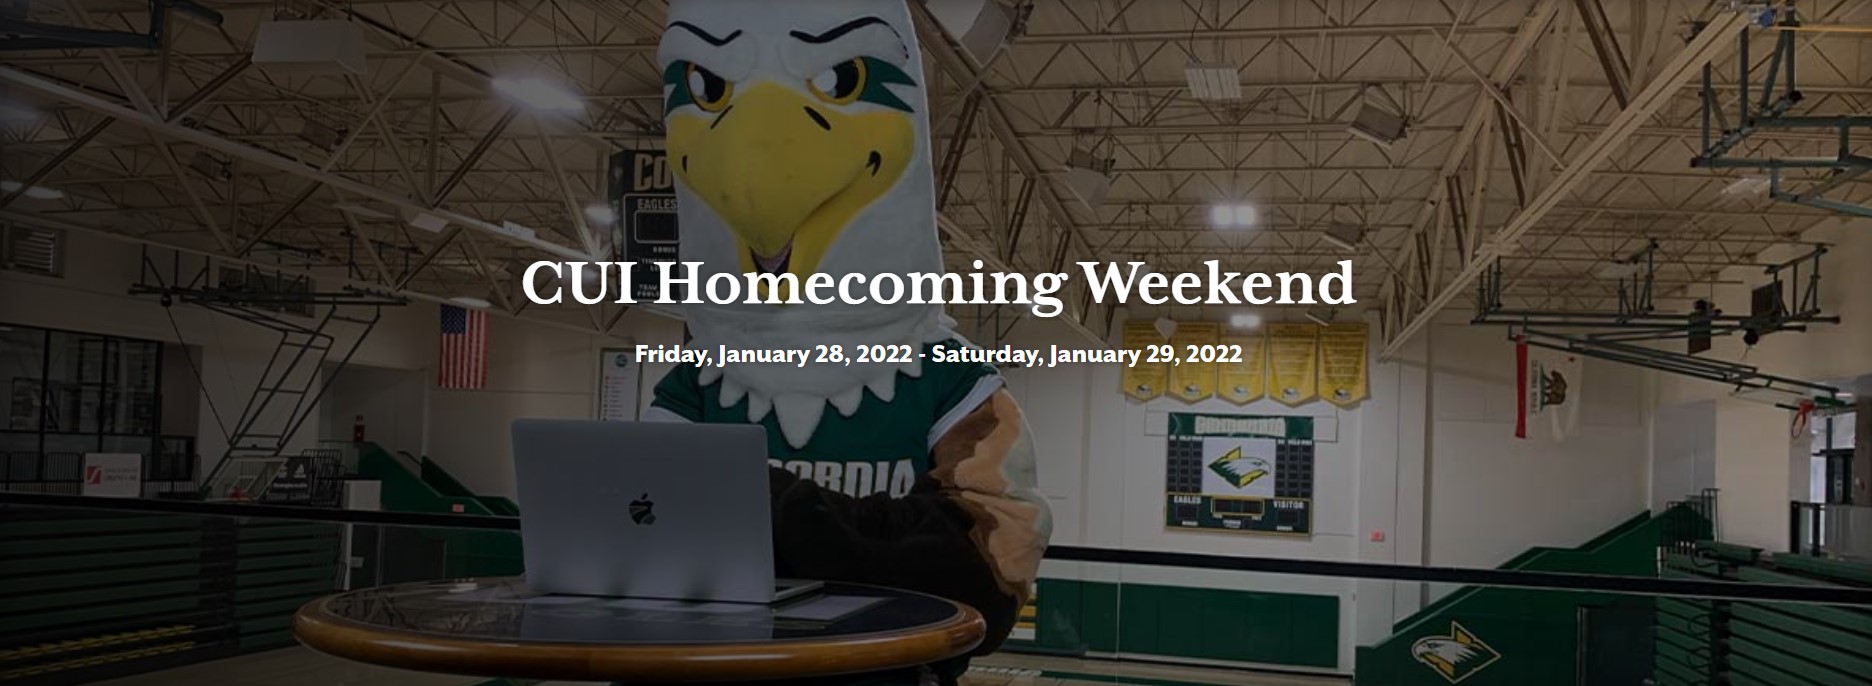 The events of the alumni homecoming weekend at CUI will be held virtually. Marty the Eagles promotes live streaming of sporting events.